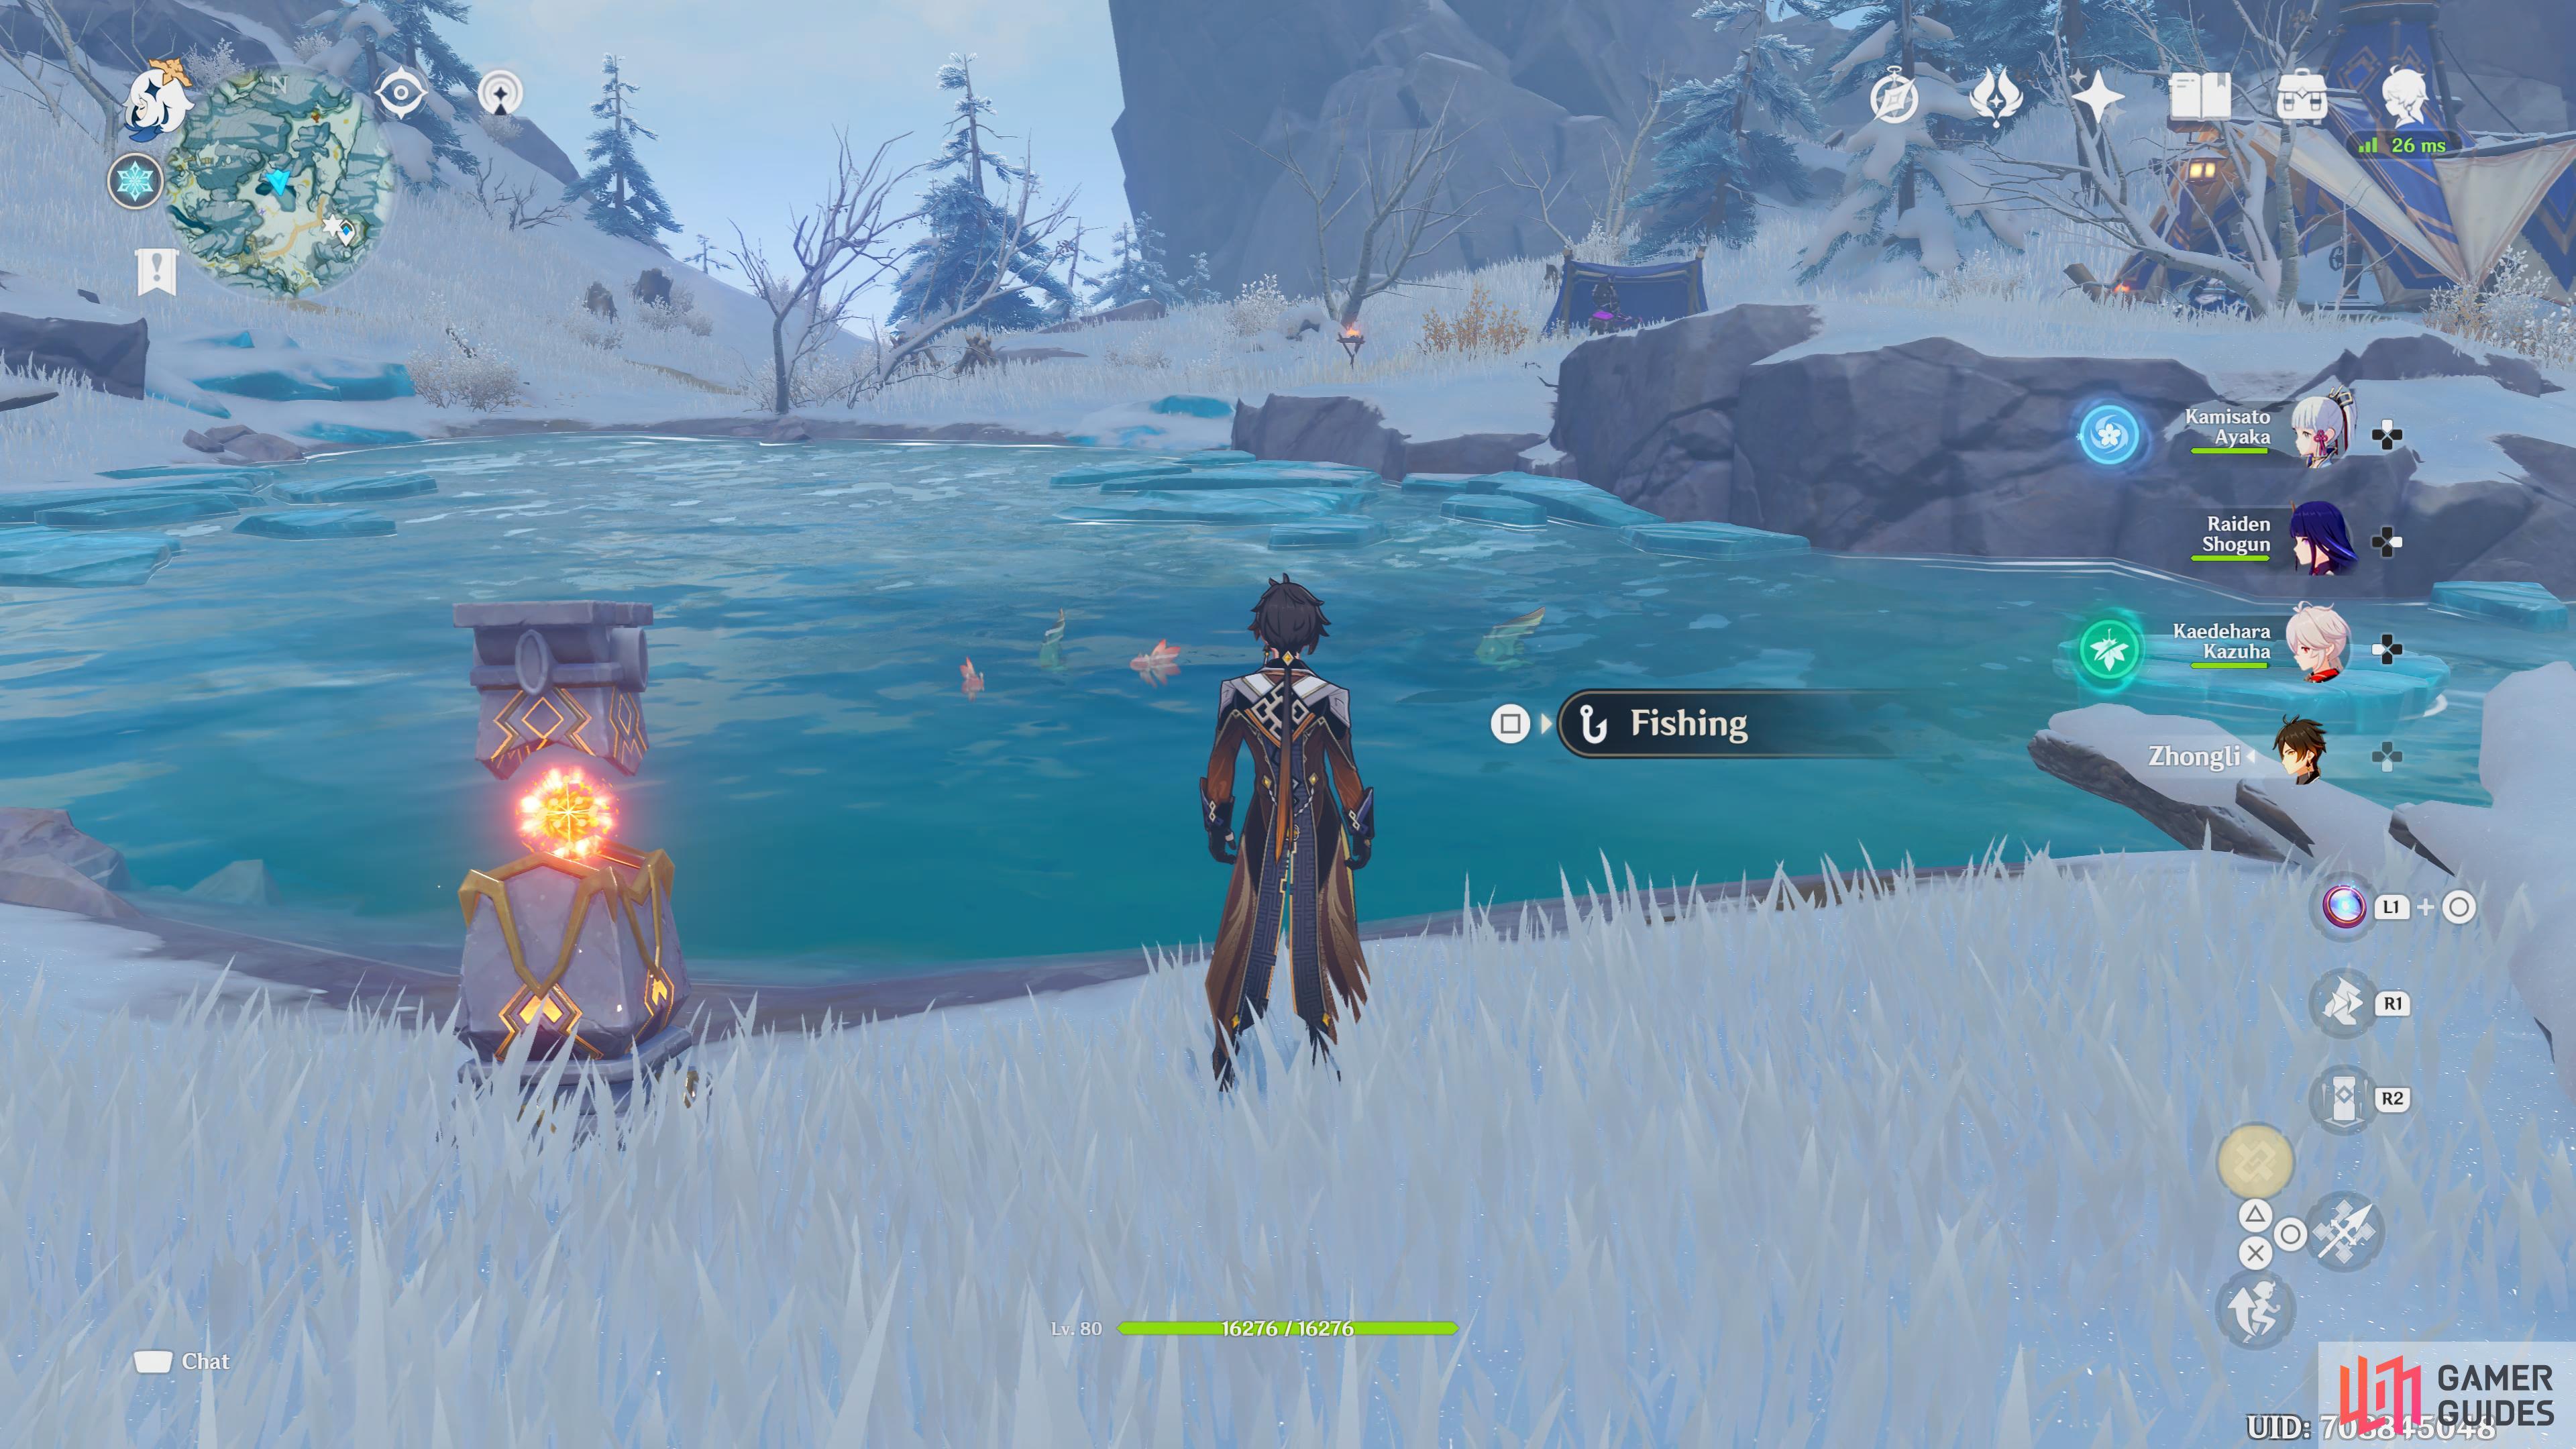 Heres a visual of the West Dragonspine Fishing Point.